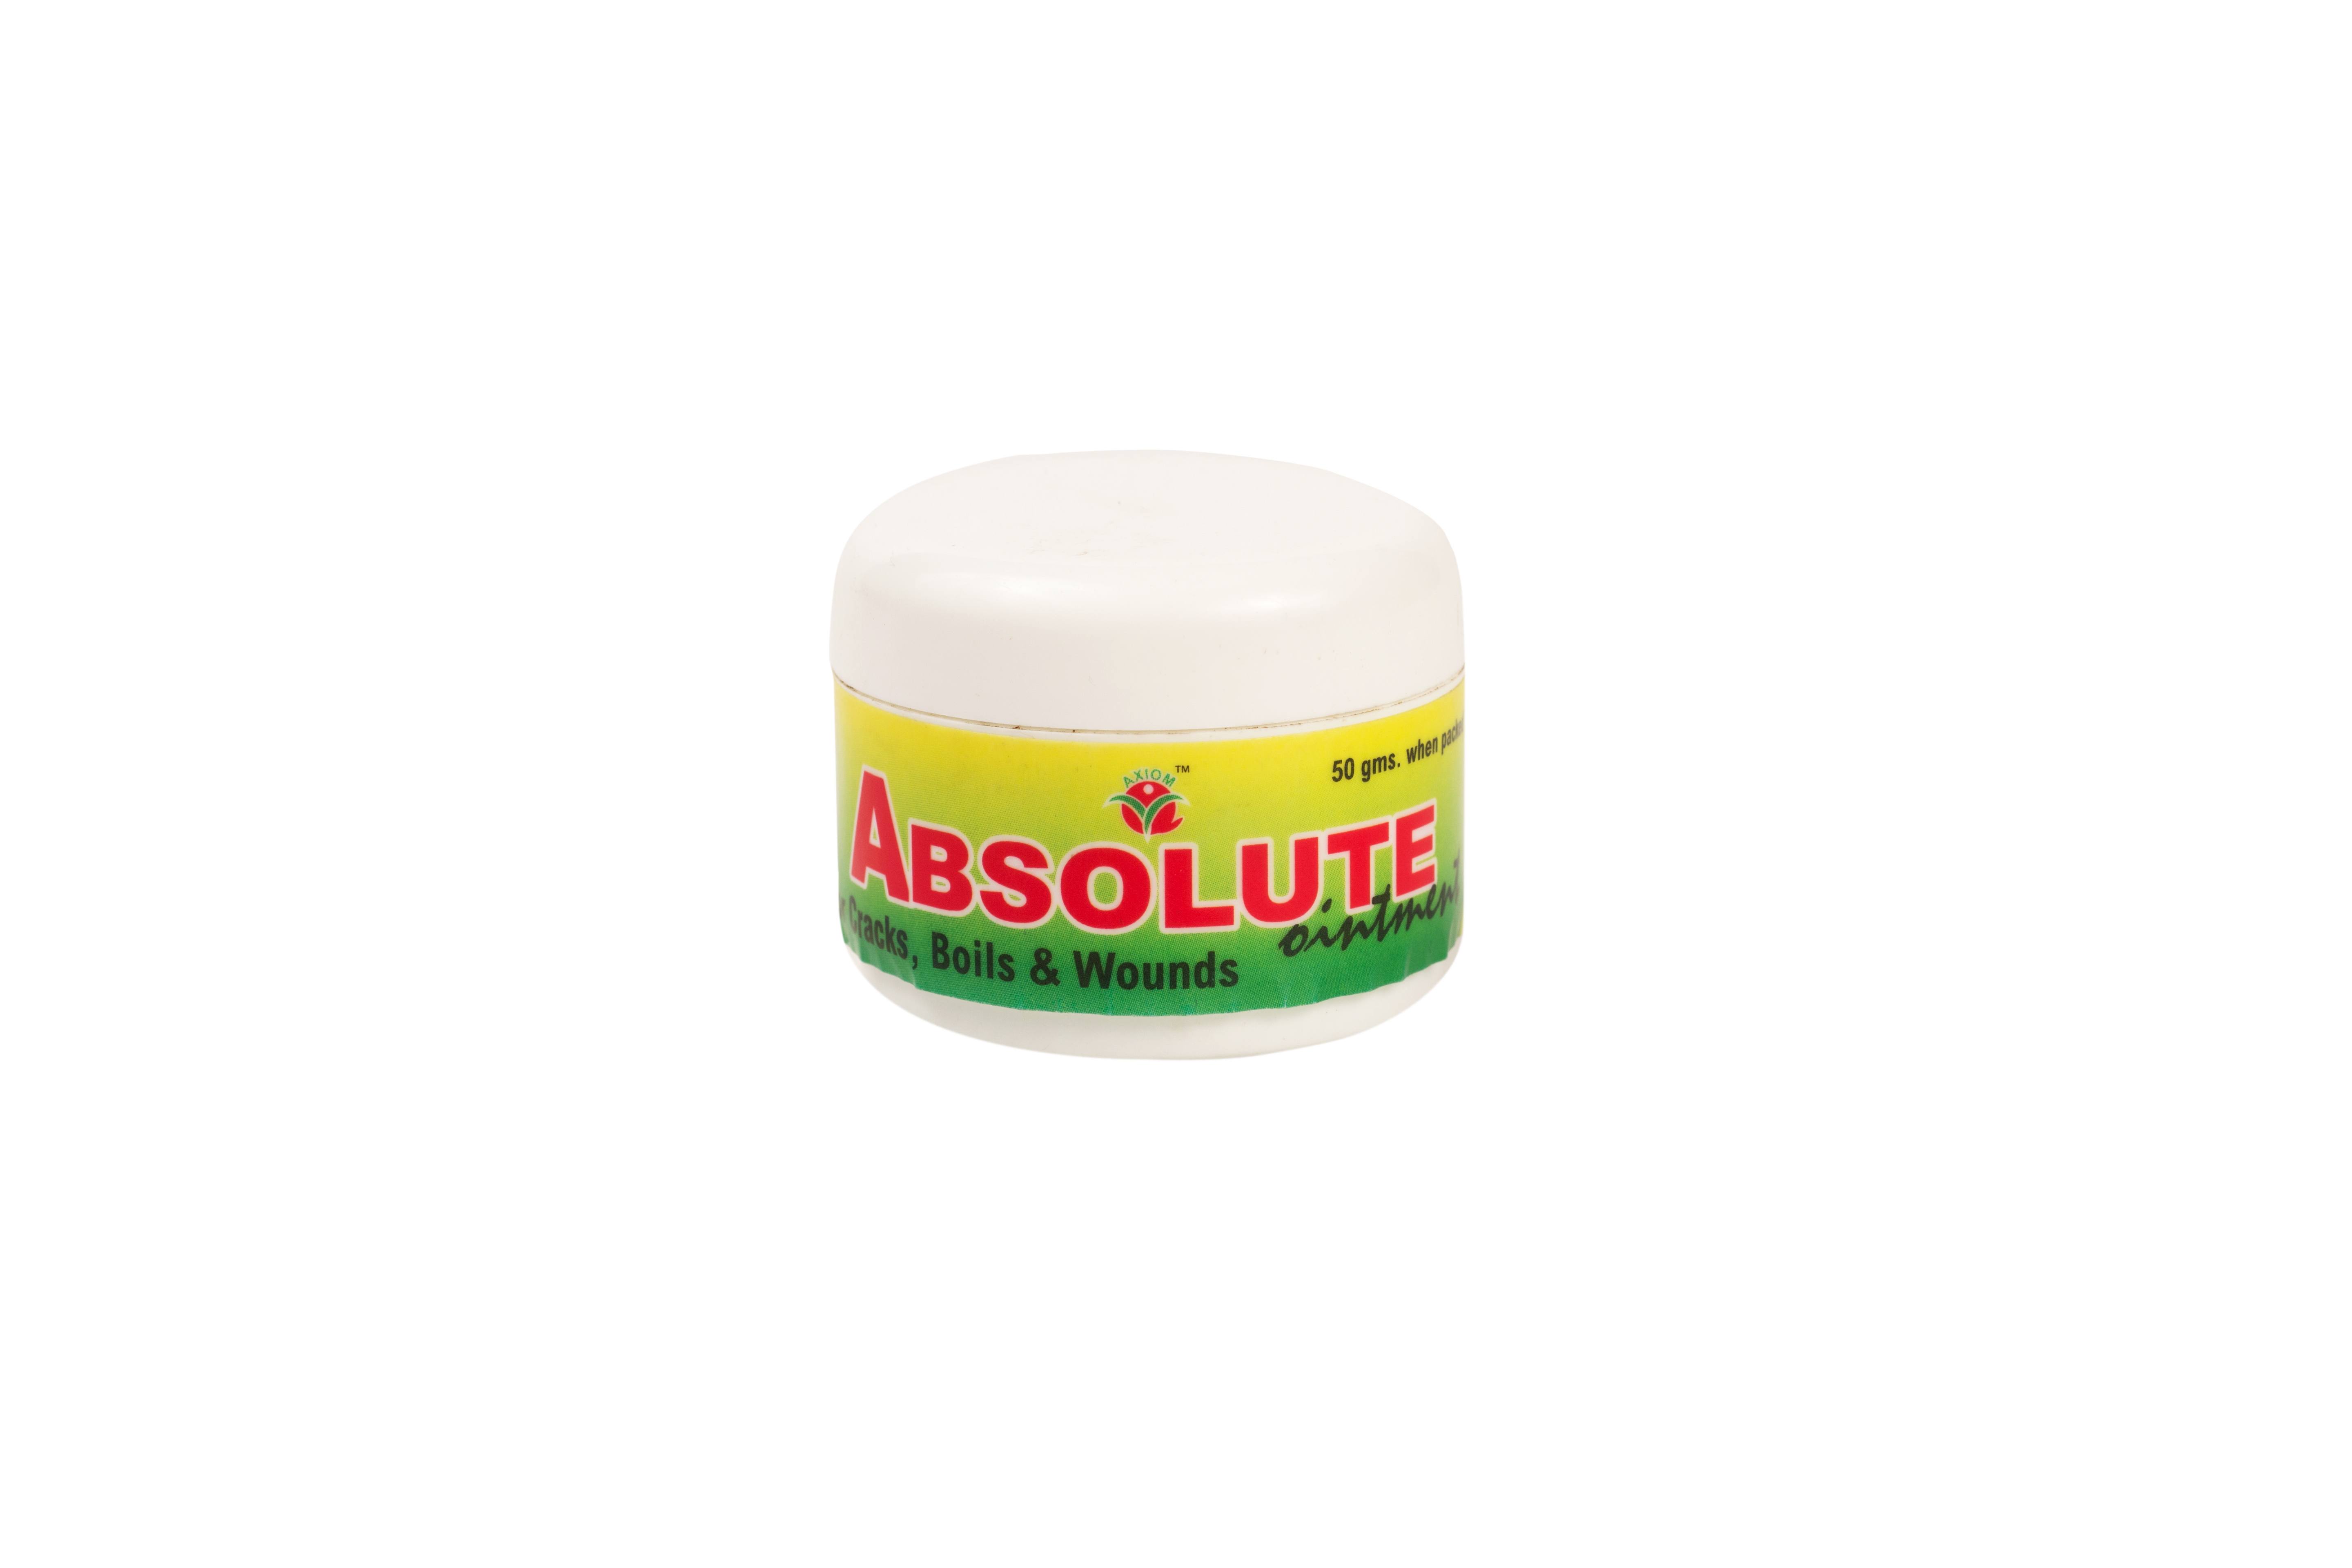 Buy Axiom Absolute Ointment at Best Price Online